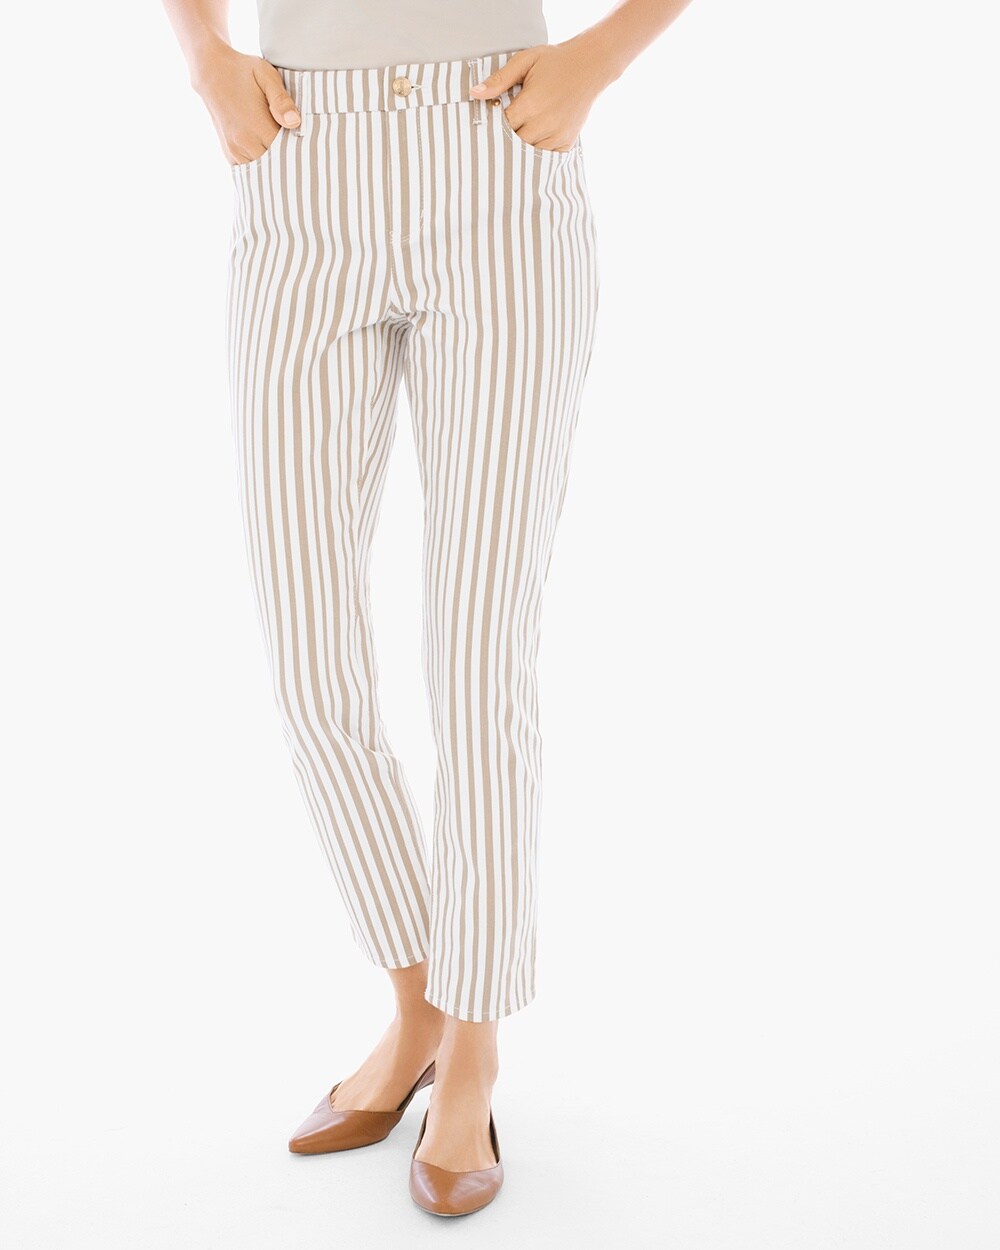 So Slimming Striped Girlfriend Ankle Jeans